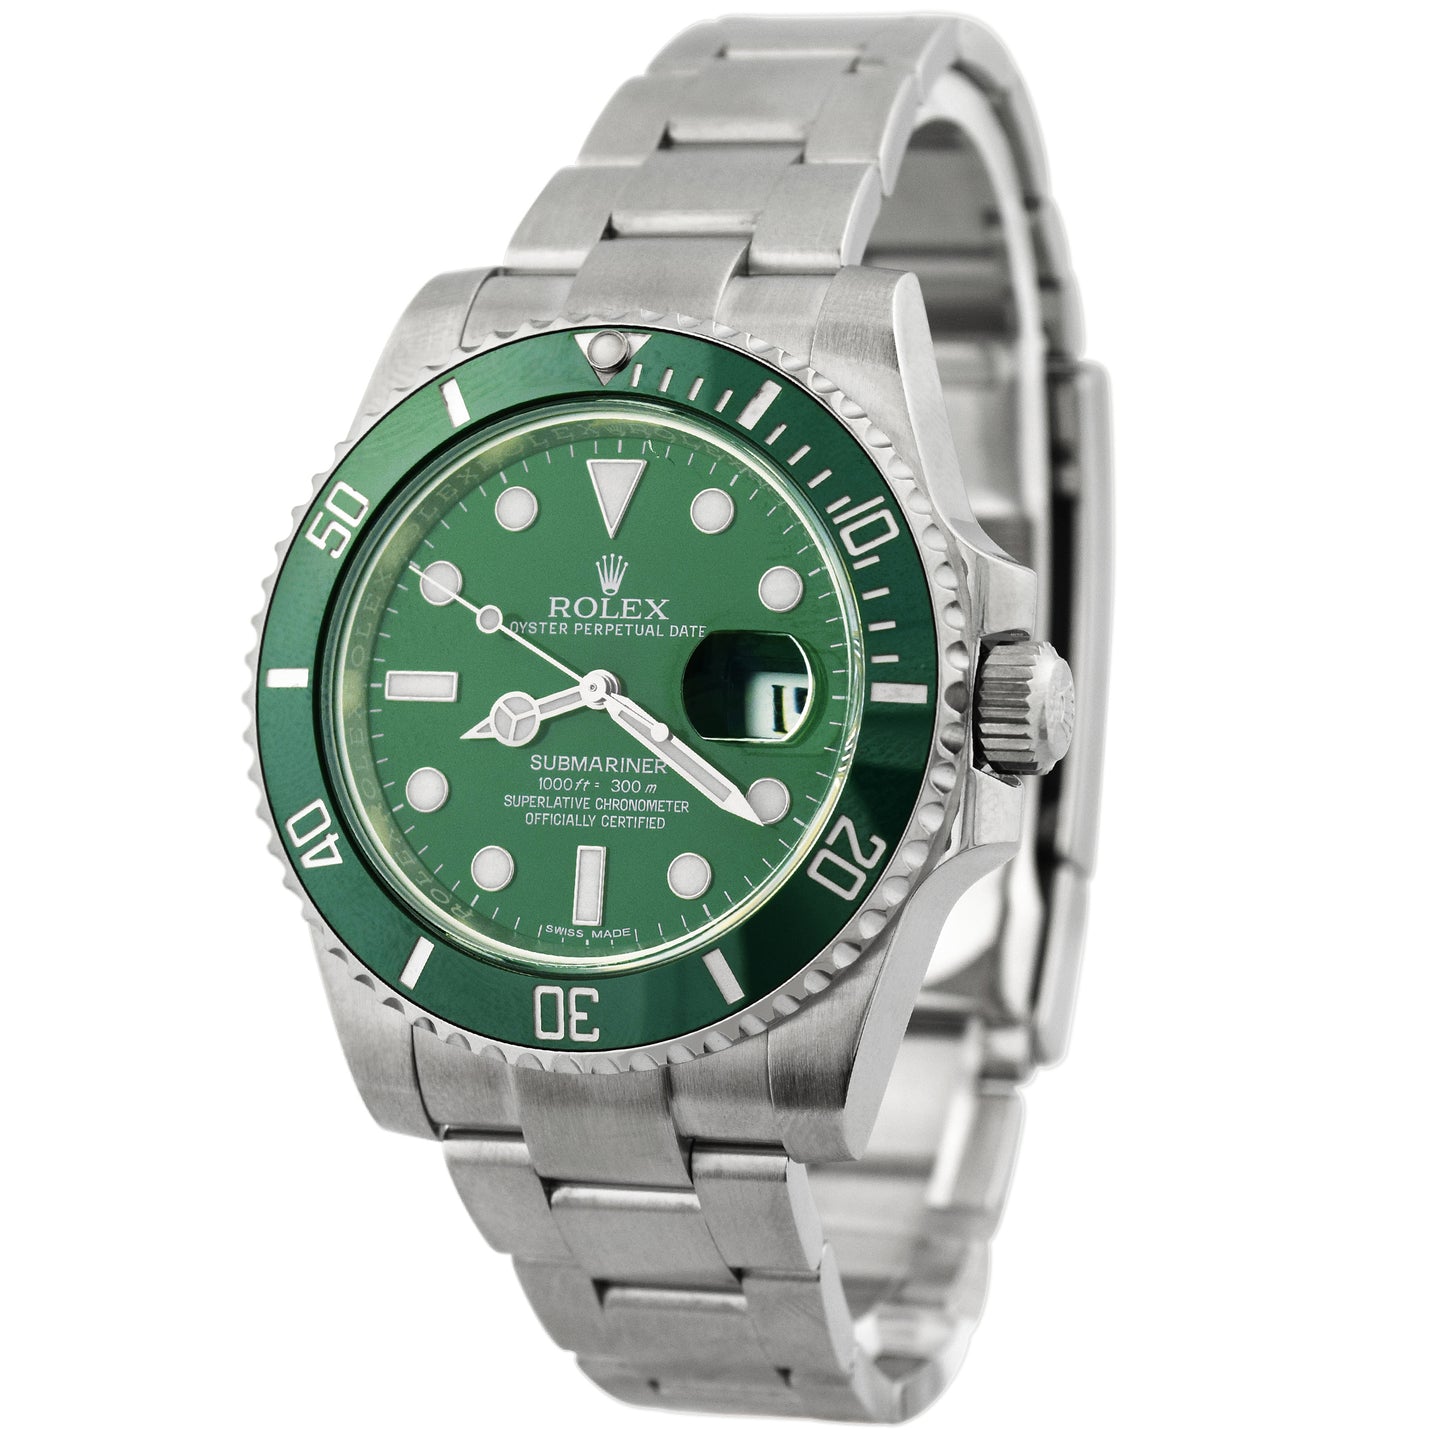 Rolex Submariner "Hulk" Stainless Steel 40mm Green Dot Dial Watch Reference# 116610LV